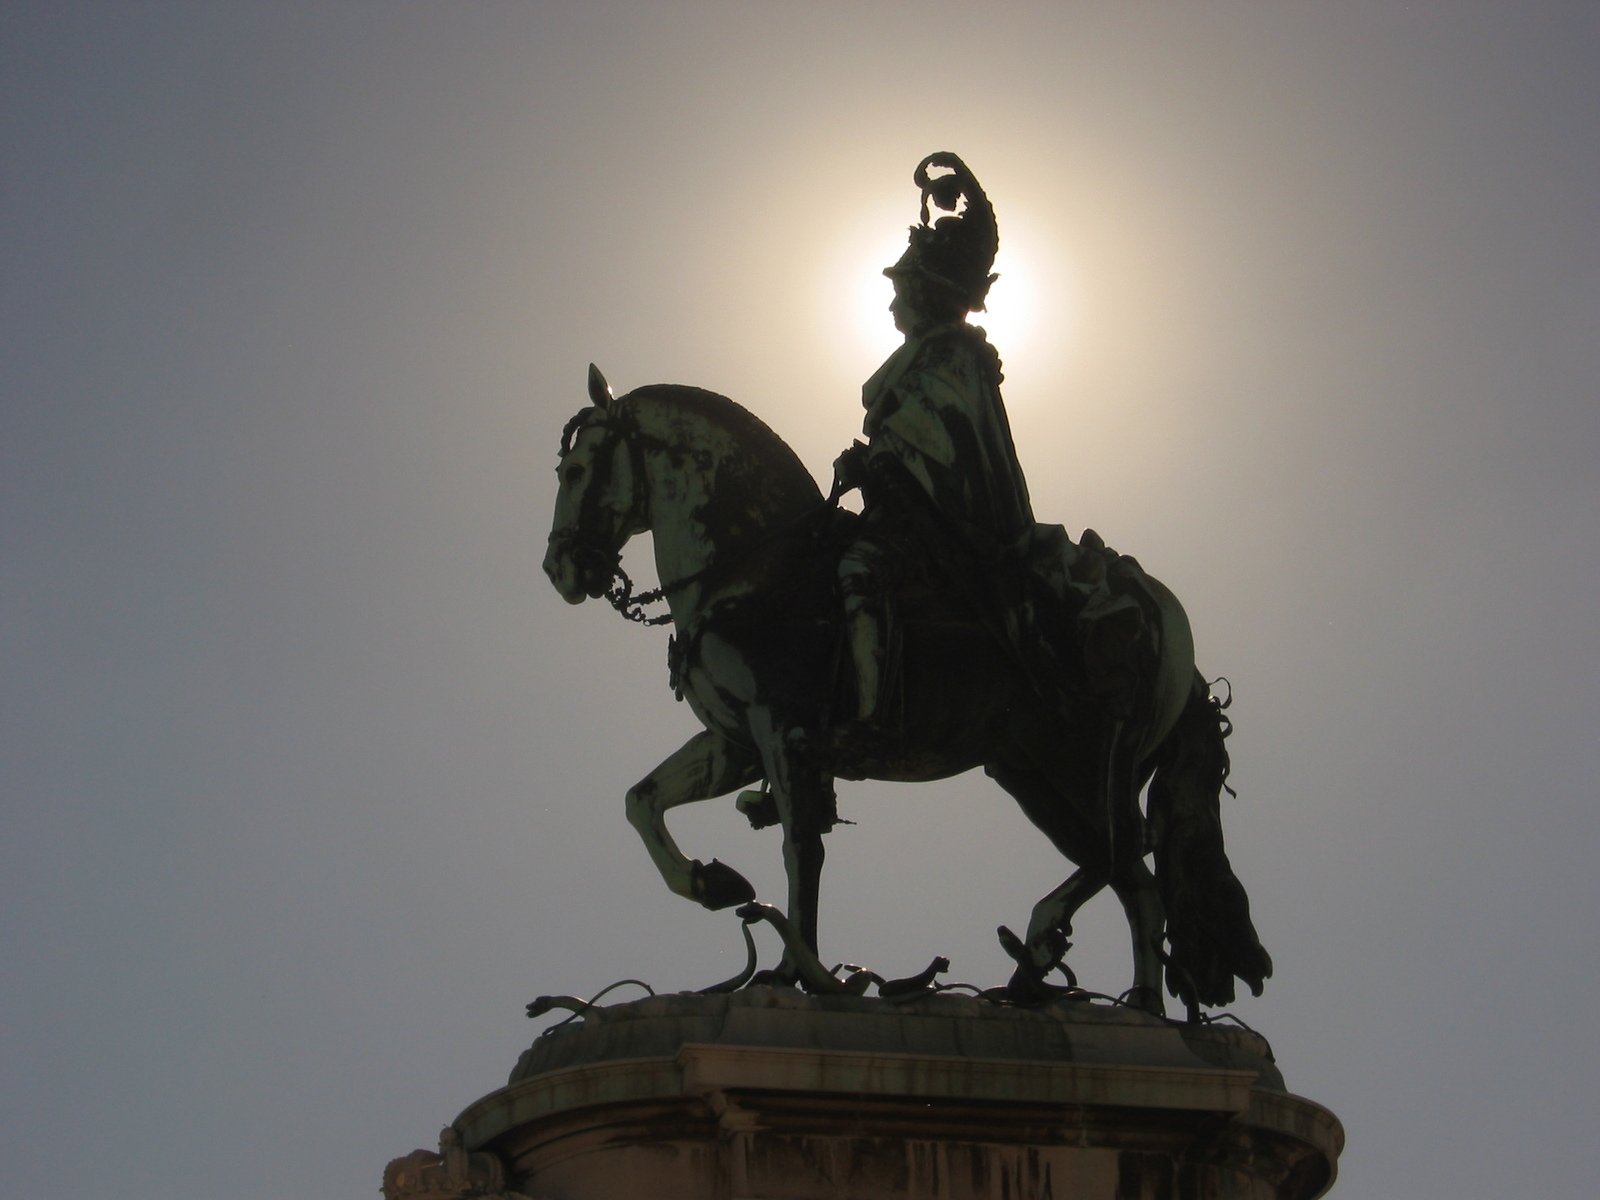 a statue of a man riding on top of a horse